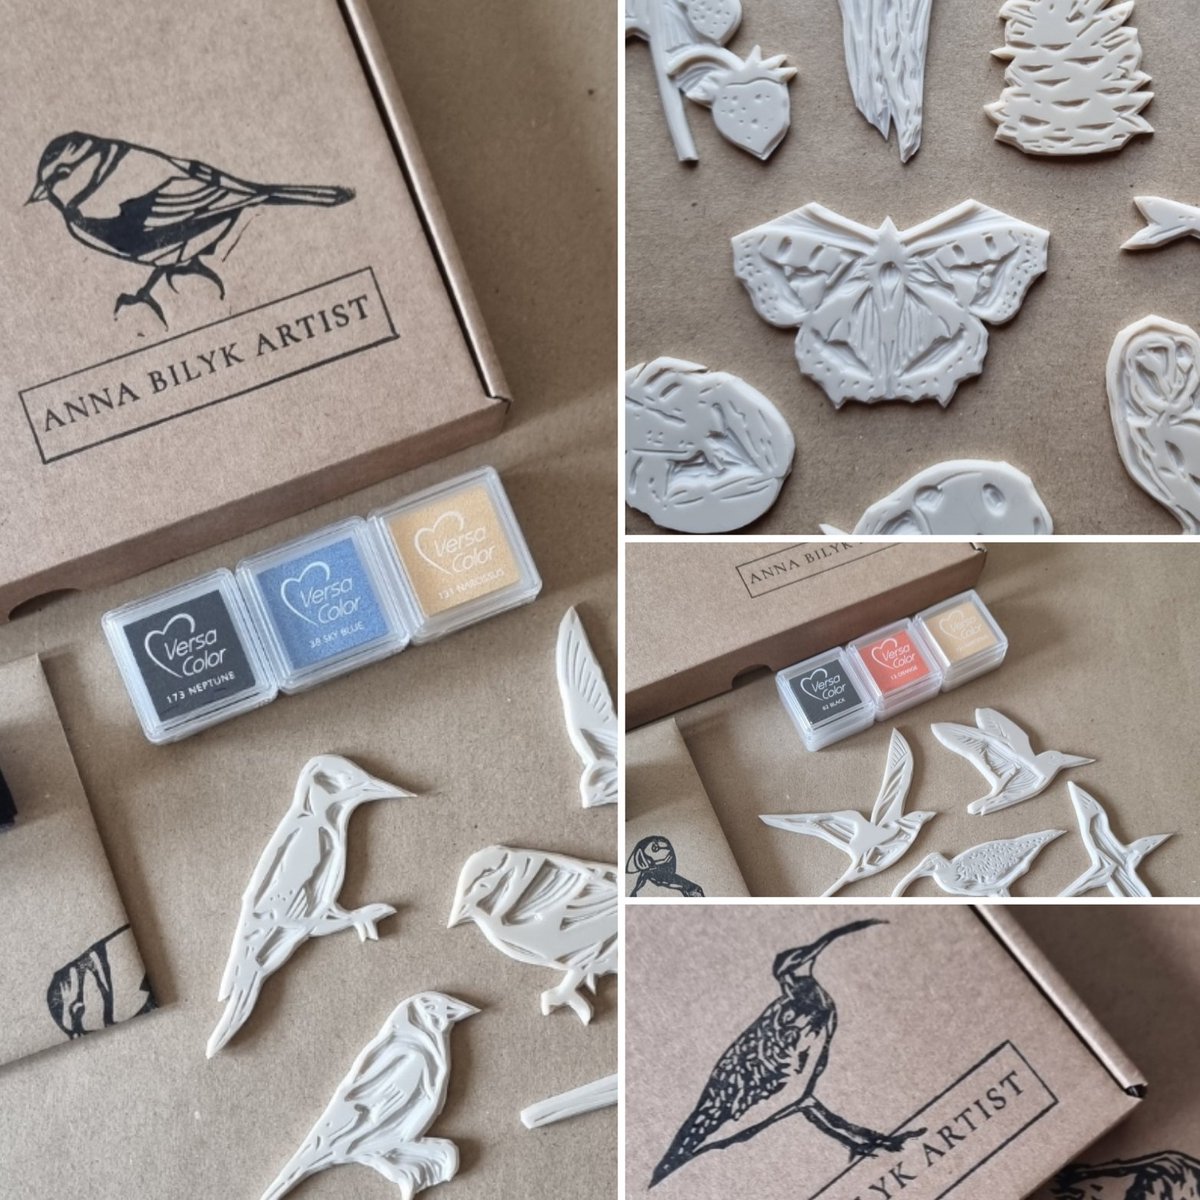 Morning - all rubber lino stamp Kits & Collections available in shop !!! Garden Birds, Seabirds, Sealife, Woodland, Butterflies & Spring Flowers 💛
thebritishcrafthouse.co.uk/product/seabir…
@BritishCrafting
#earlybiz #ukgiftam #shopindie #stamps #crafting